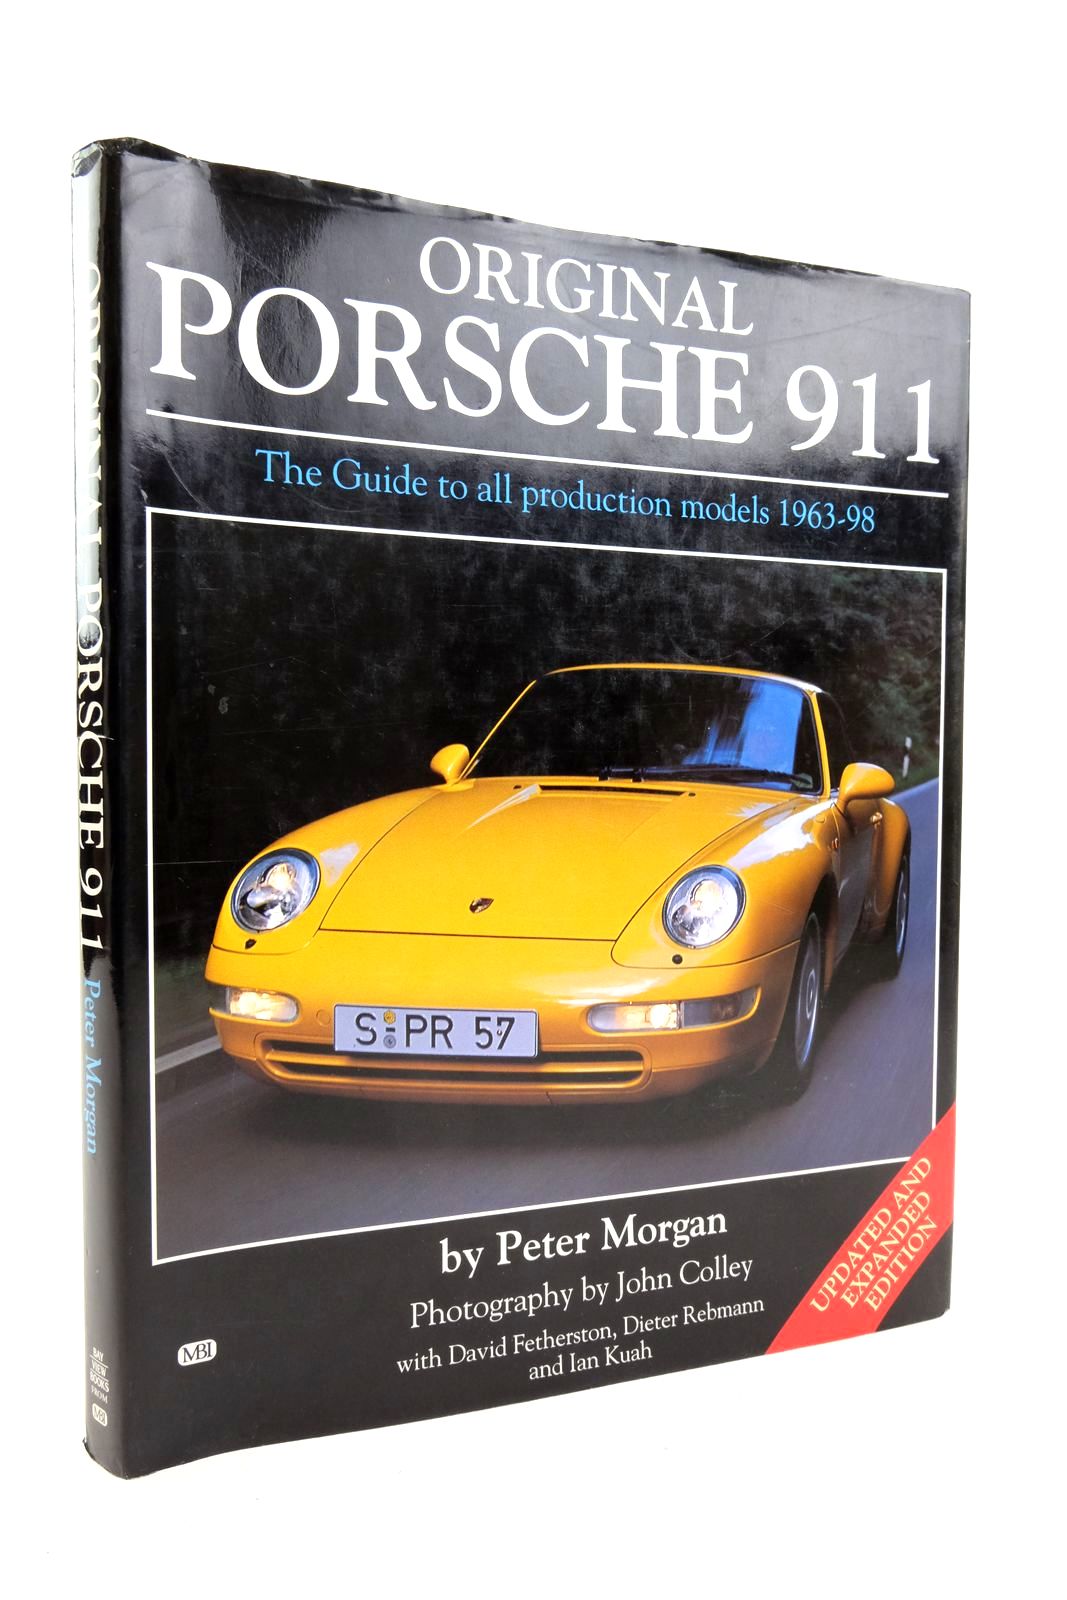 Photo of ORIGINAL PORSCHE 911 written by Morgan, Peter published by Bay View Books (STOCK CODE: 2137703)  for sale by Stella & Rose's Books